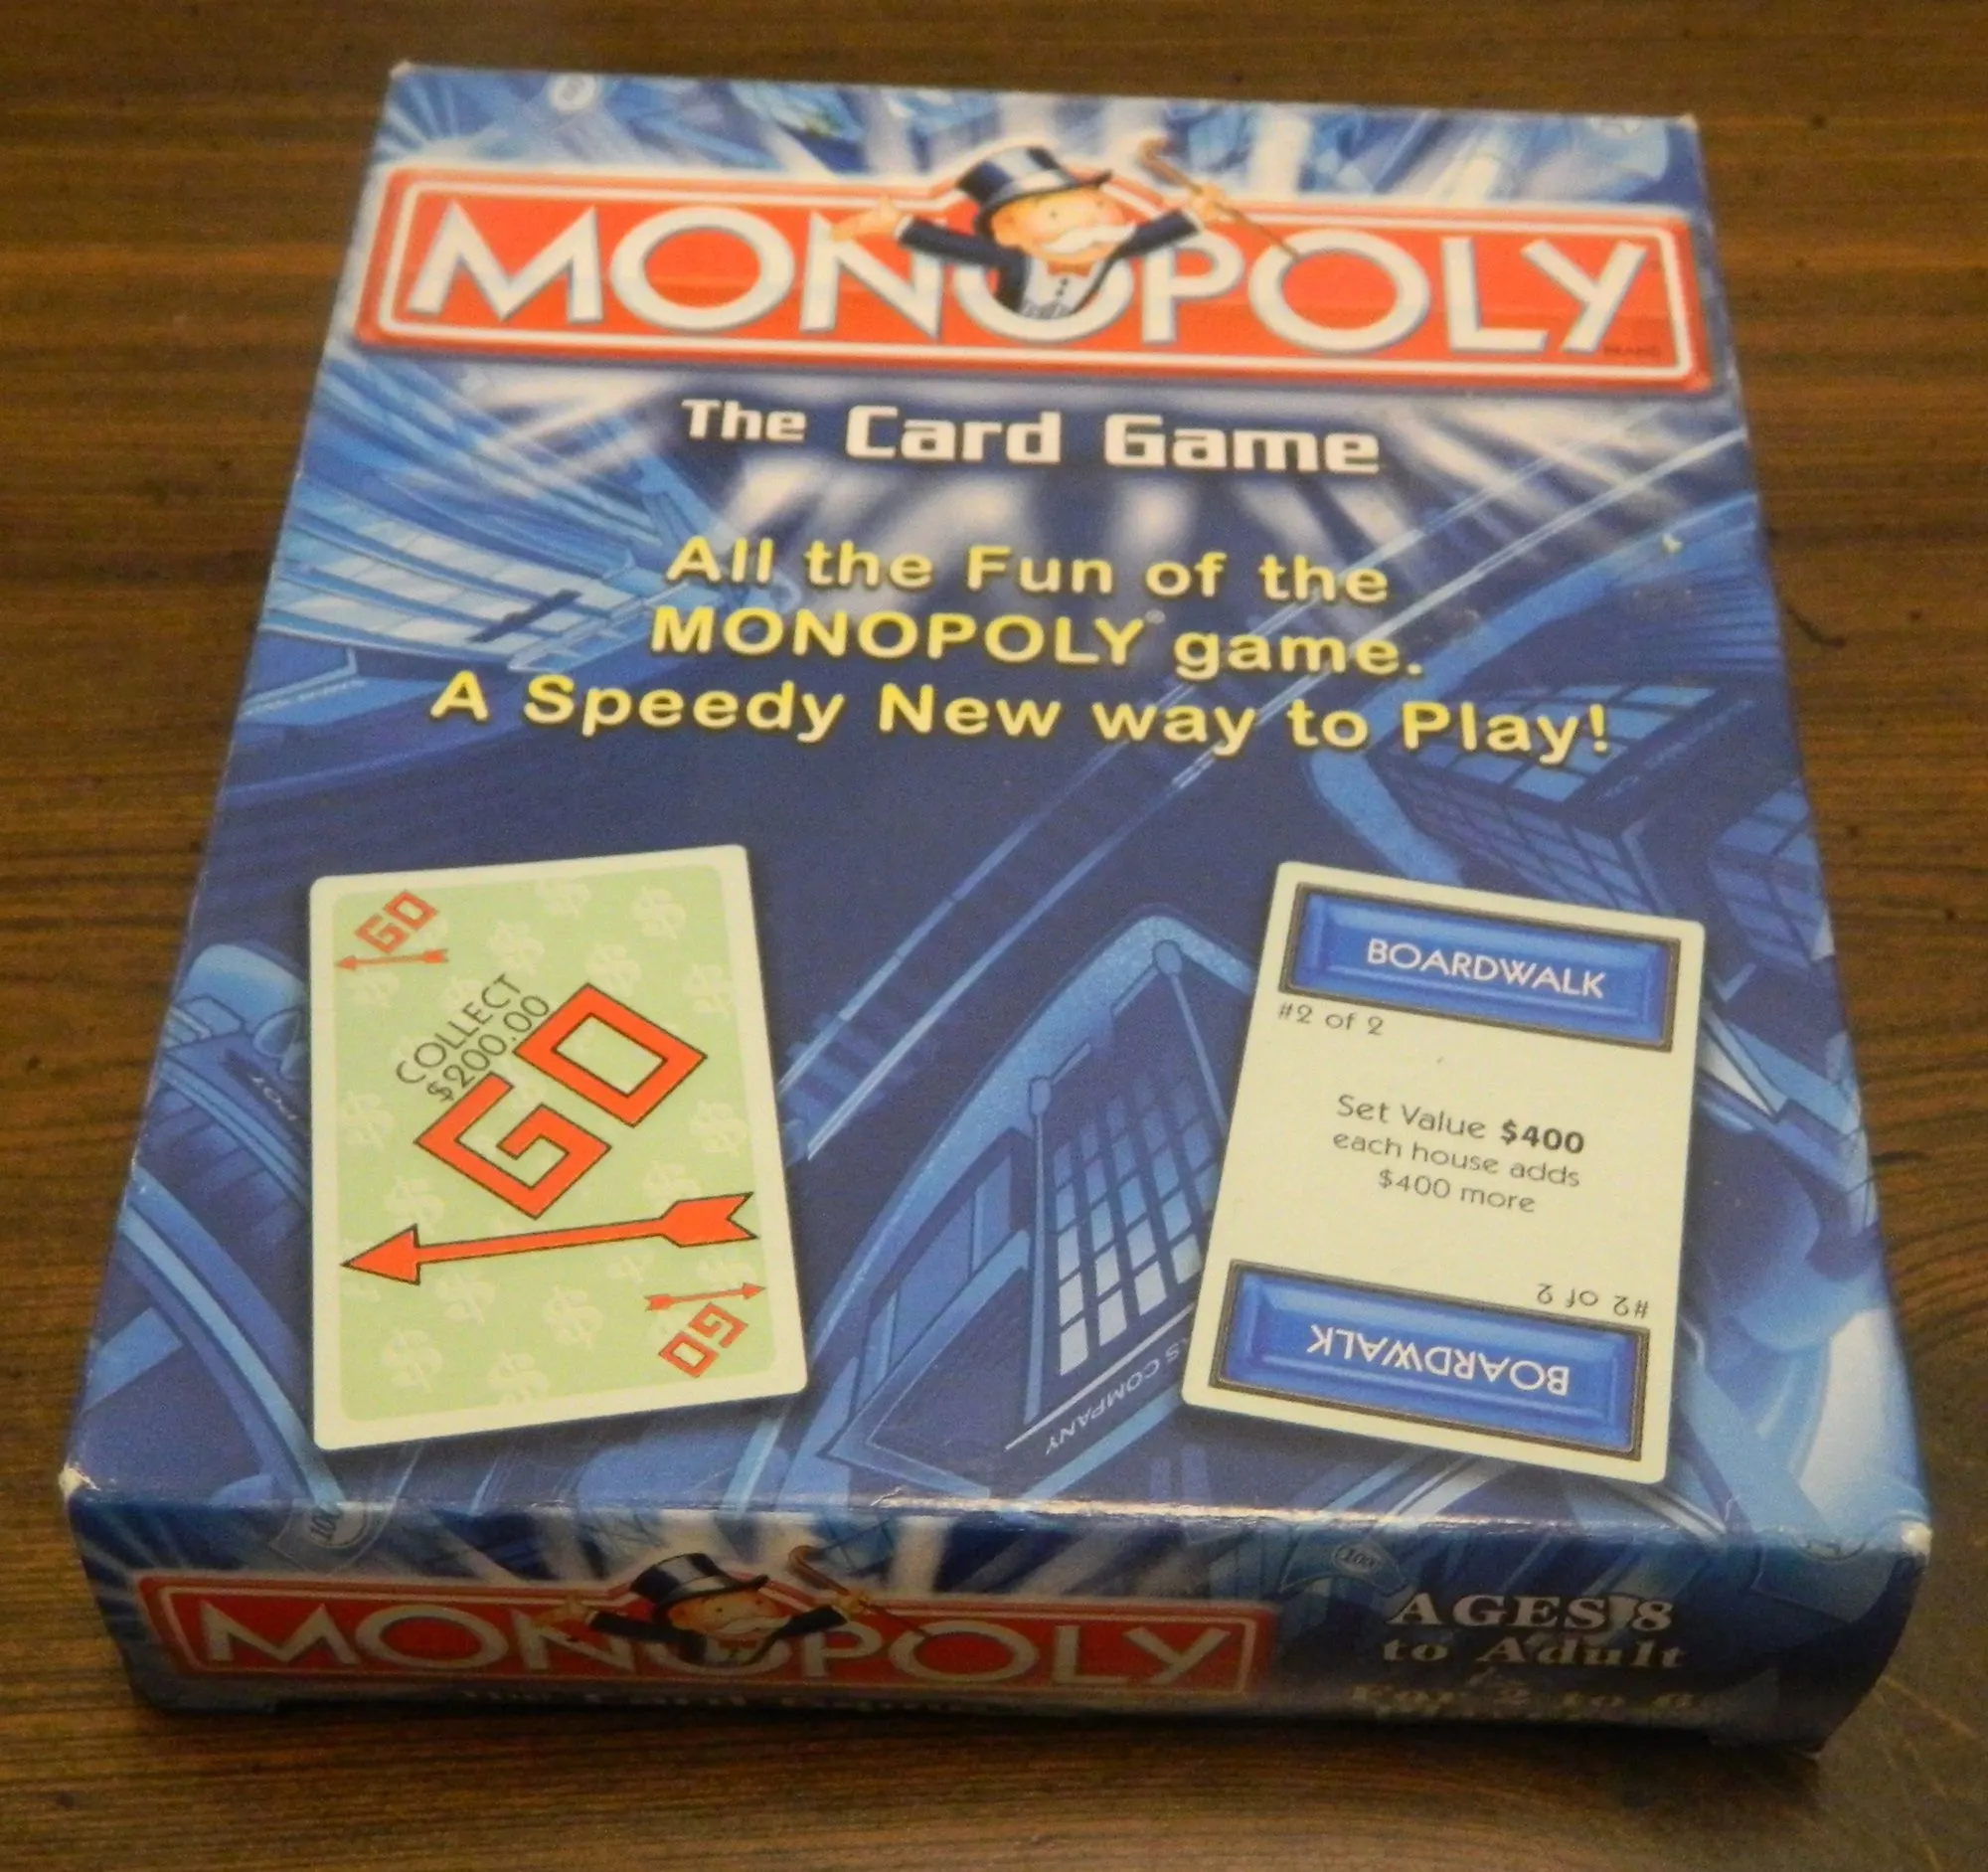 Box for Monopoly Card Game